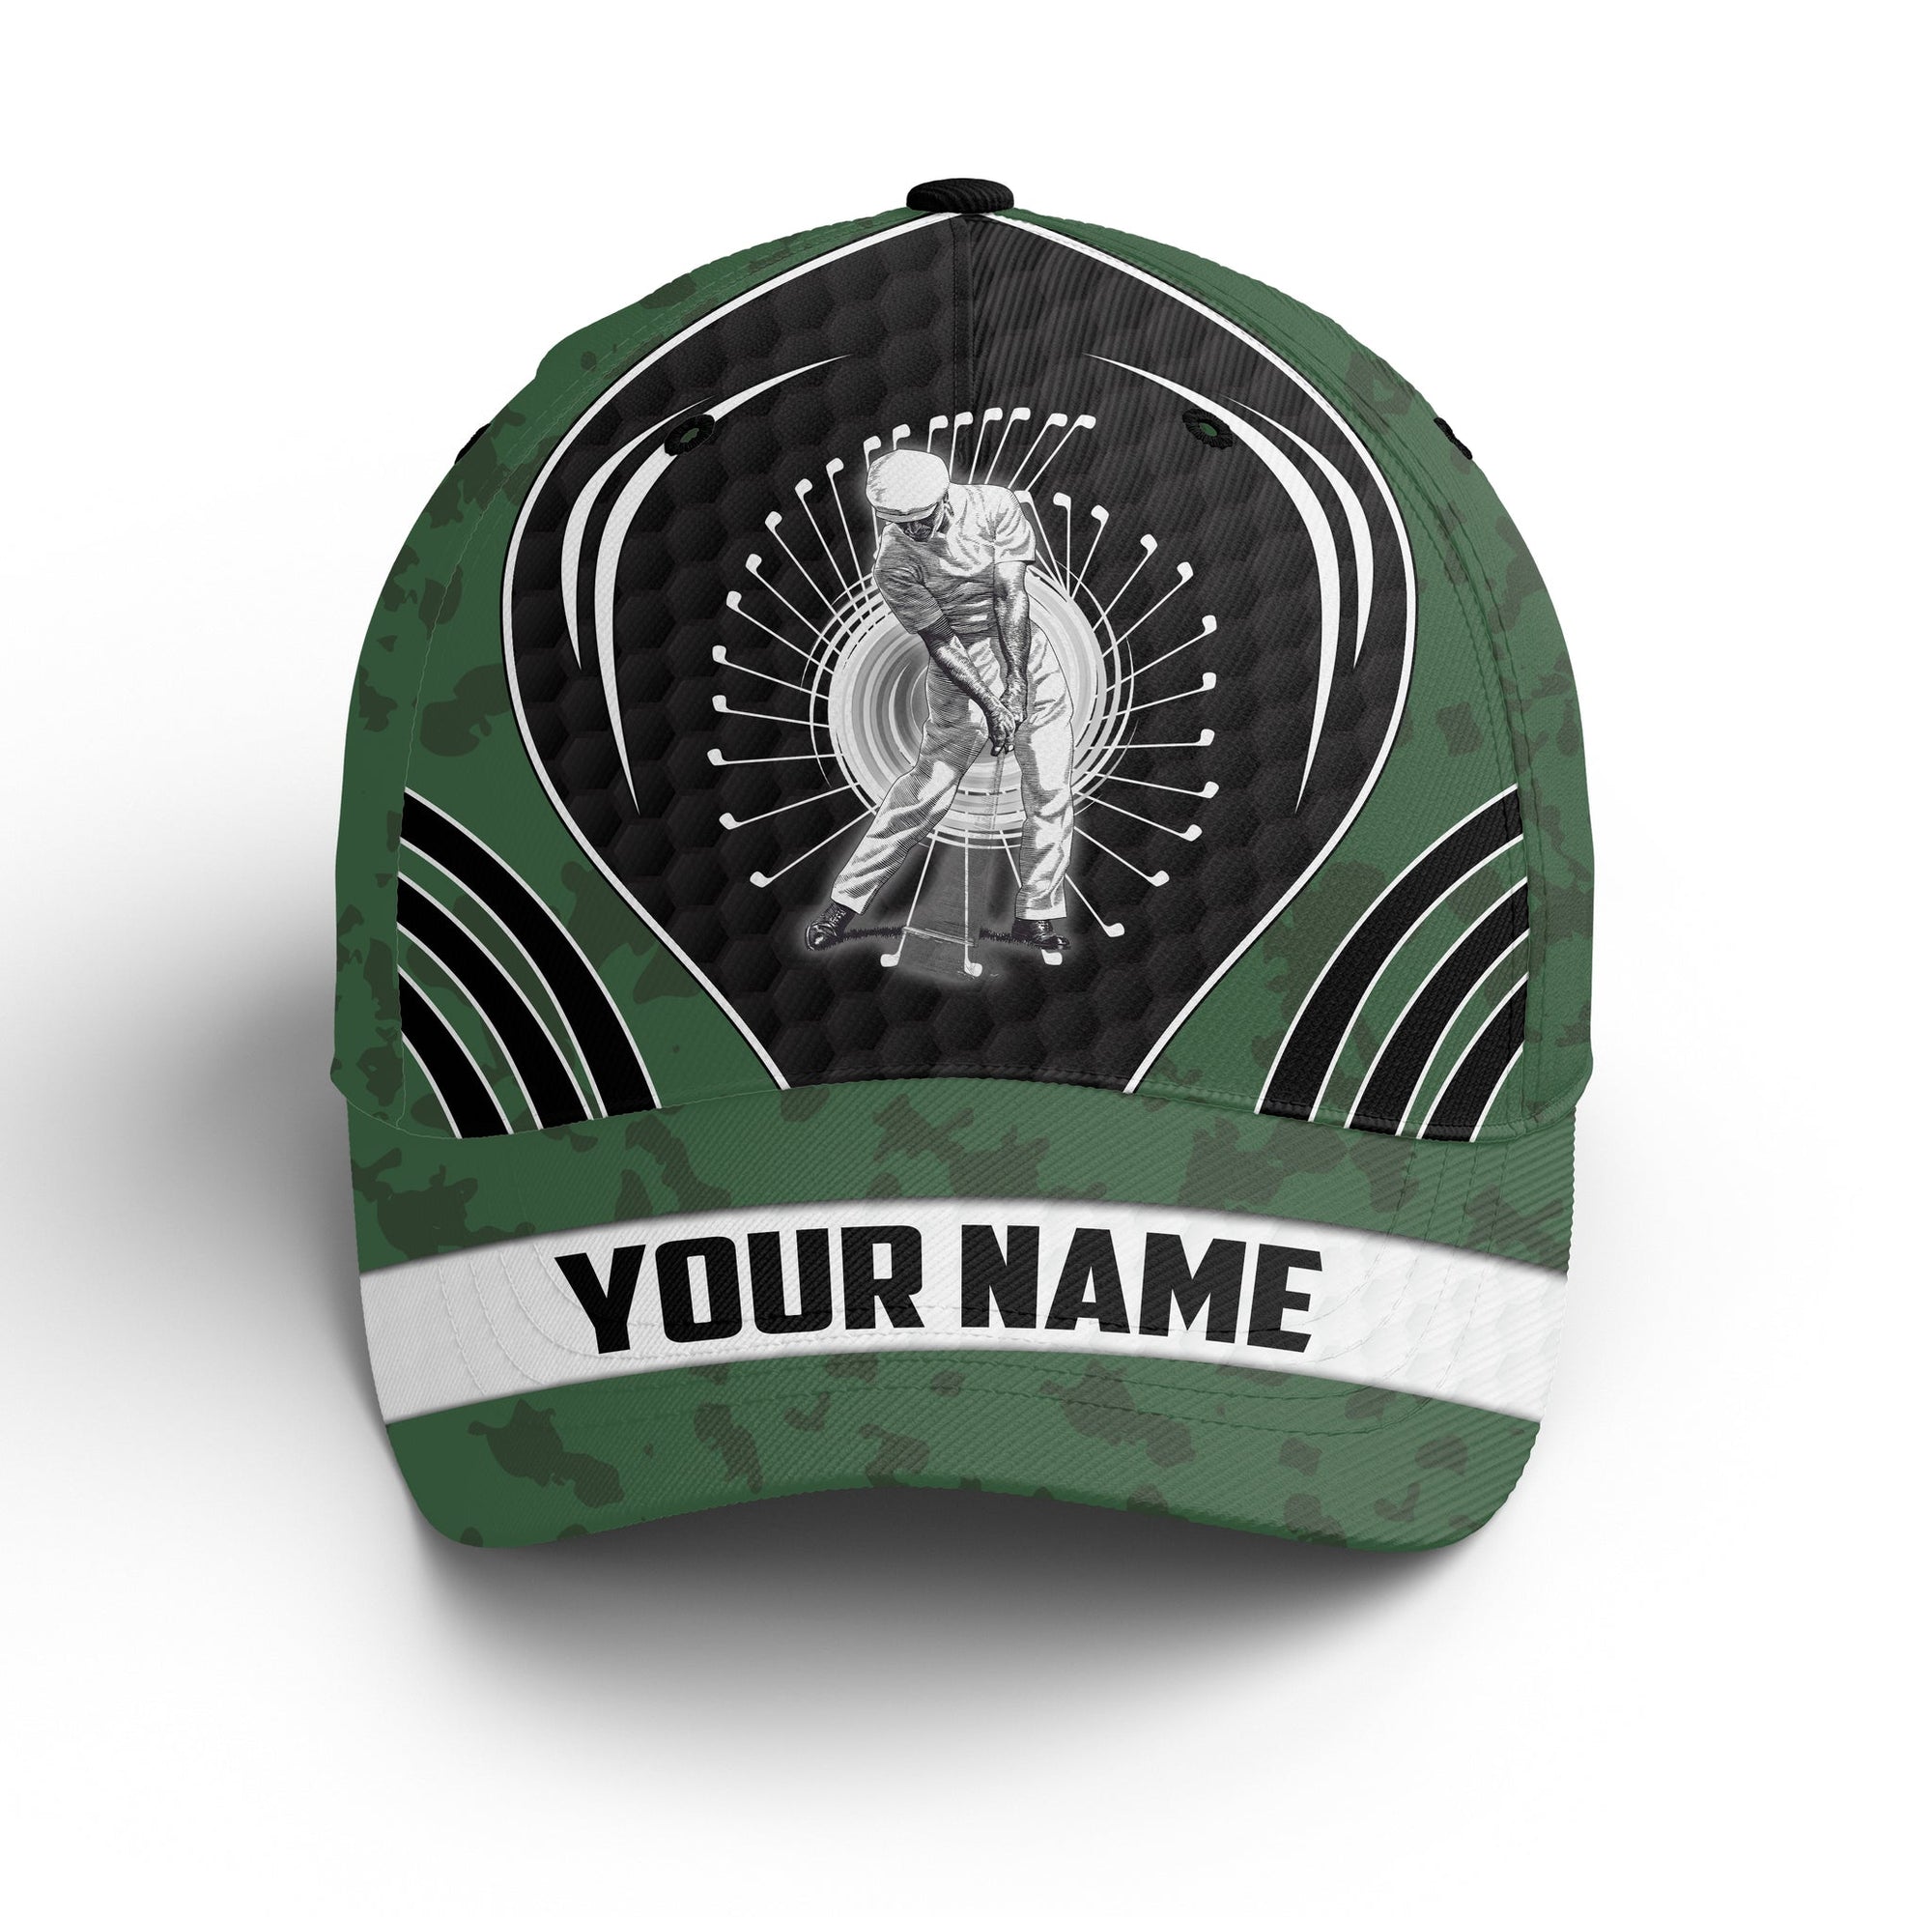 Golf Cap Custom Name For Men, Personalized Golf Lover Gifts, Green Camo Golf Sun Hats Gifts For Him, Golfer, Her, Friend